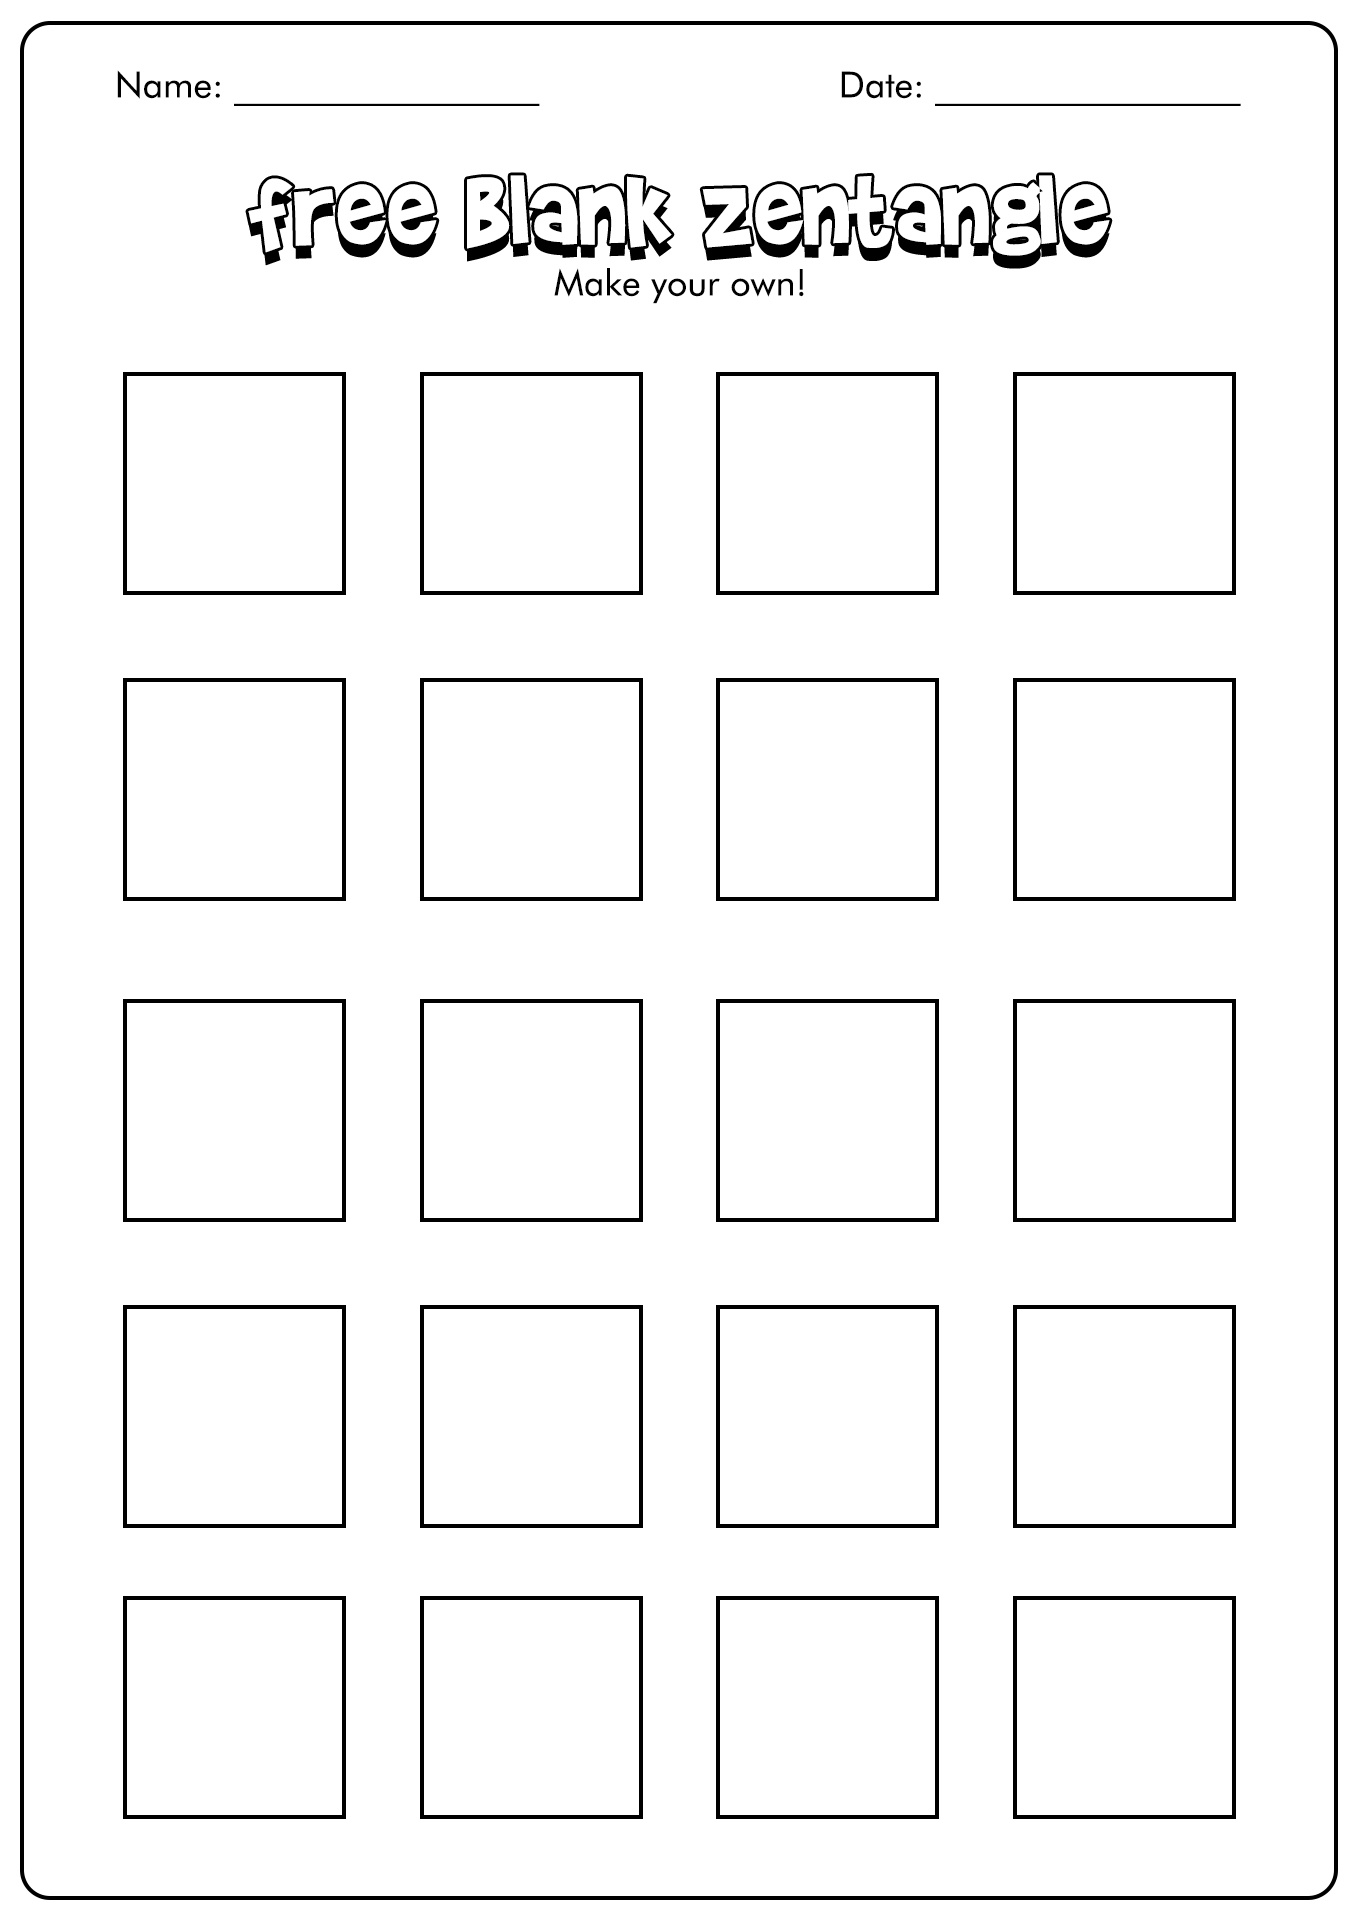 13-best-images-of-blank-quilt-worksheet-blank-quilt-square-template-elementary-art-lesson